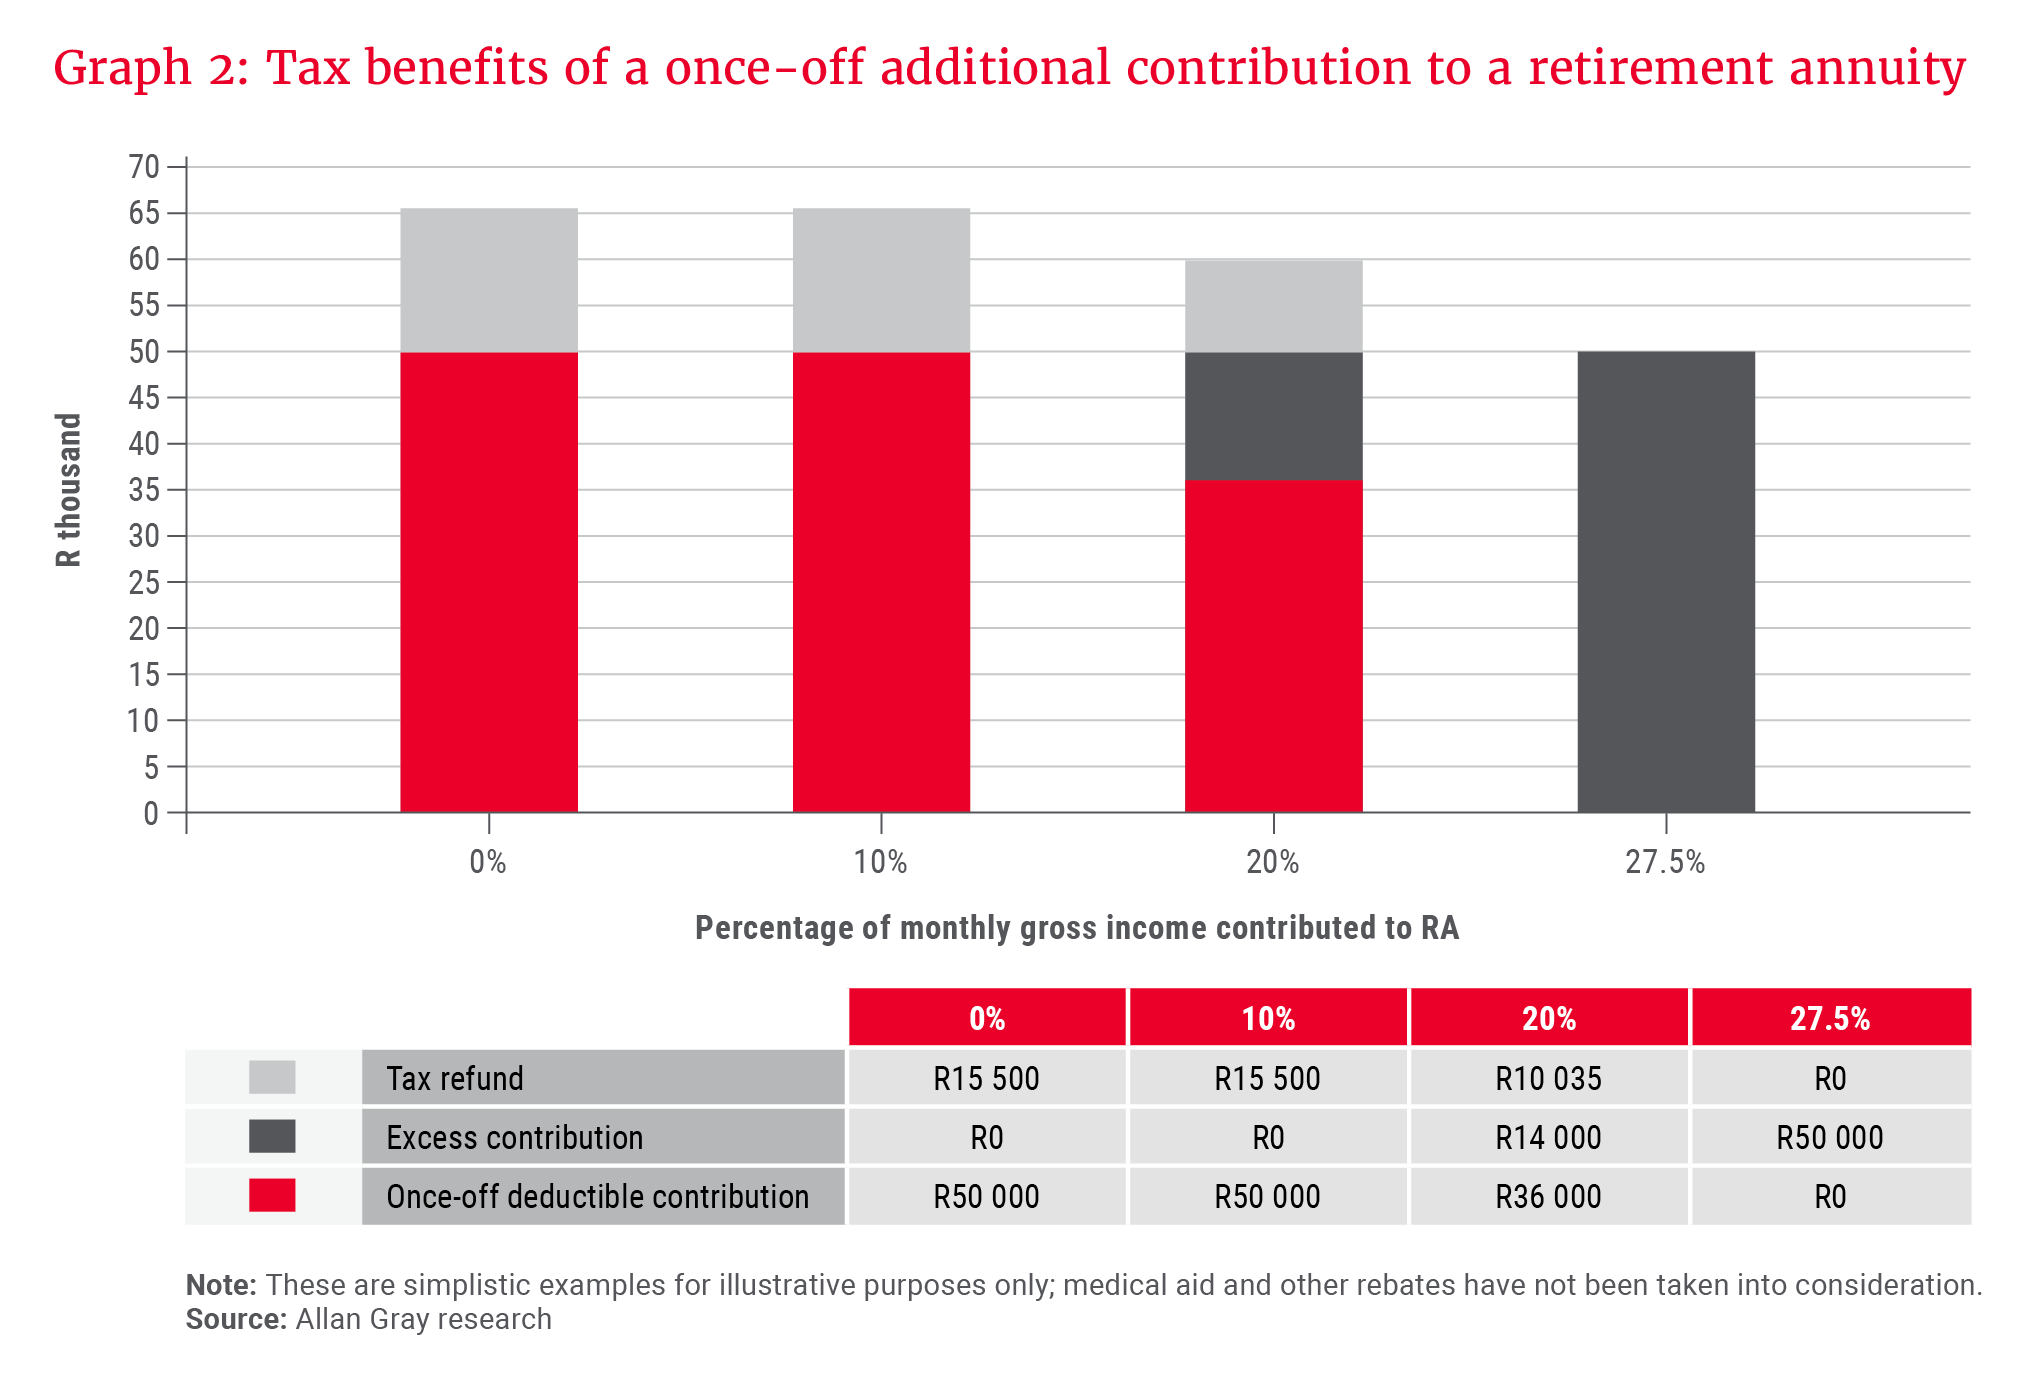 Graph 2_Tax benefits of a once-off additional contribution to a retirement annuity_300dpi.png